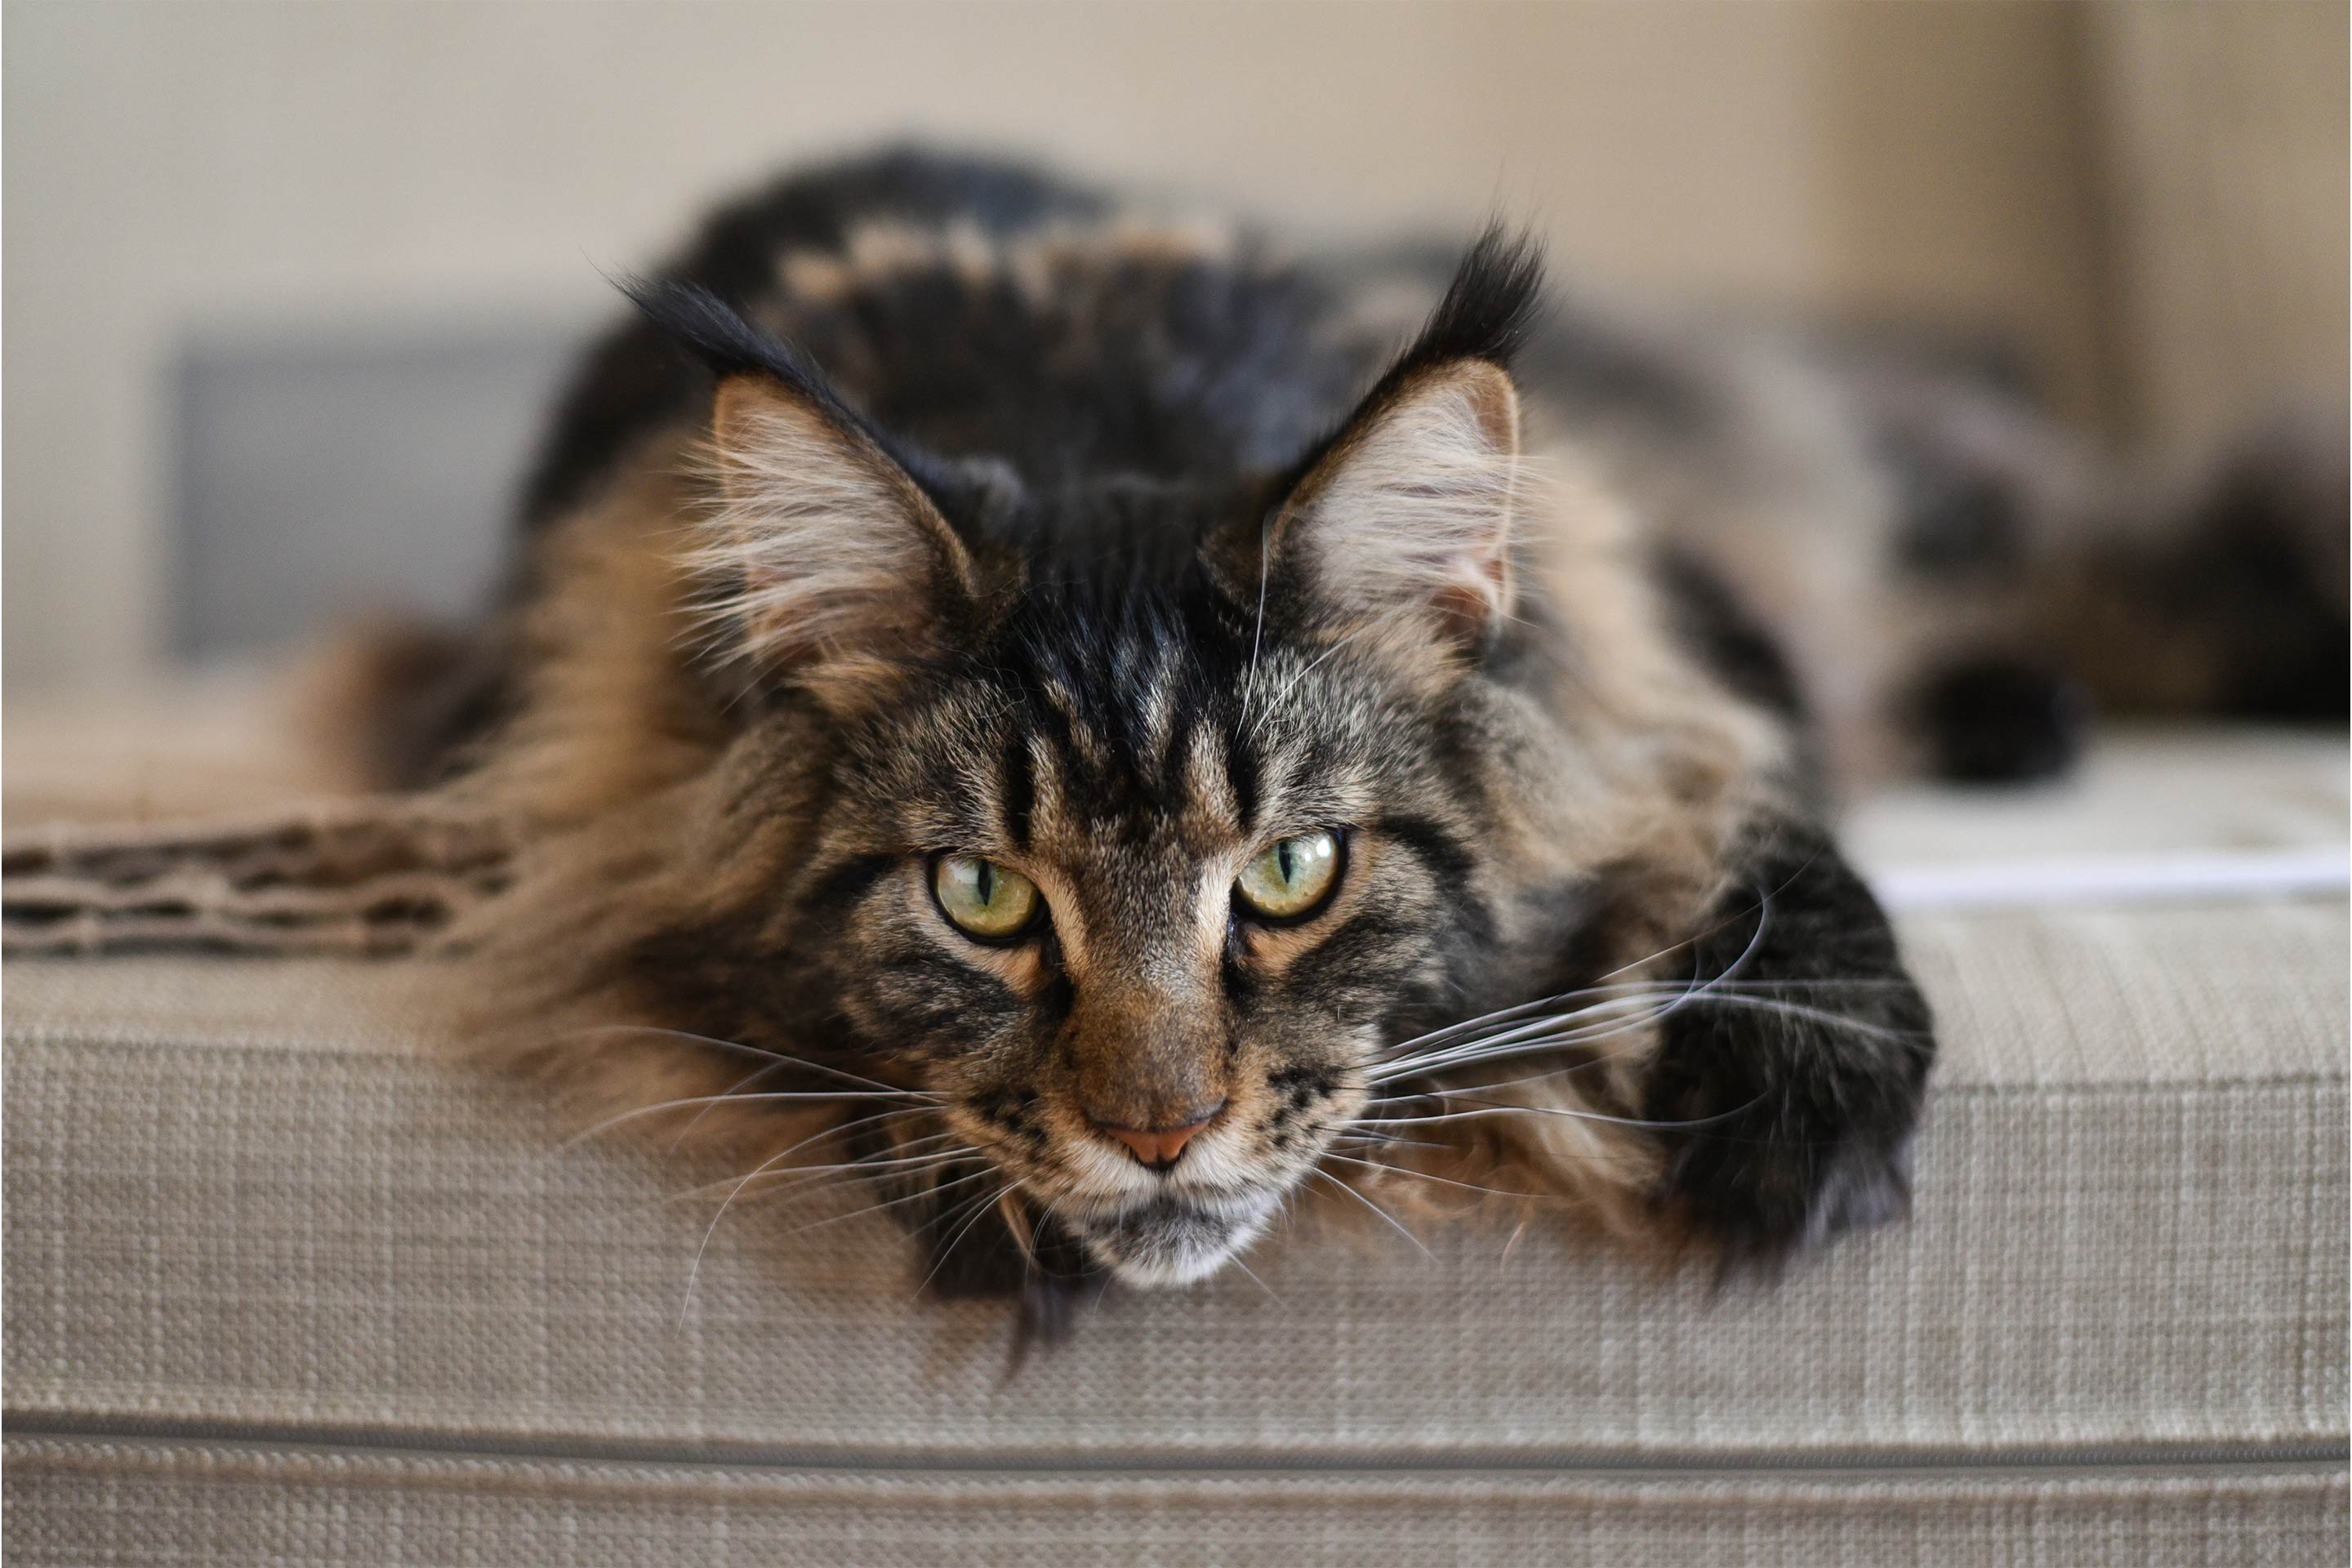 How Much Does a Maine Coon Cat Cost